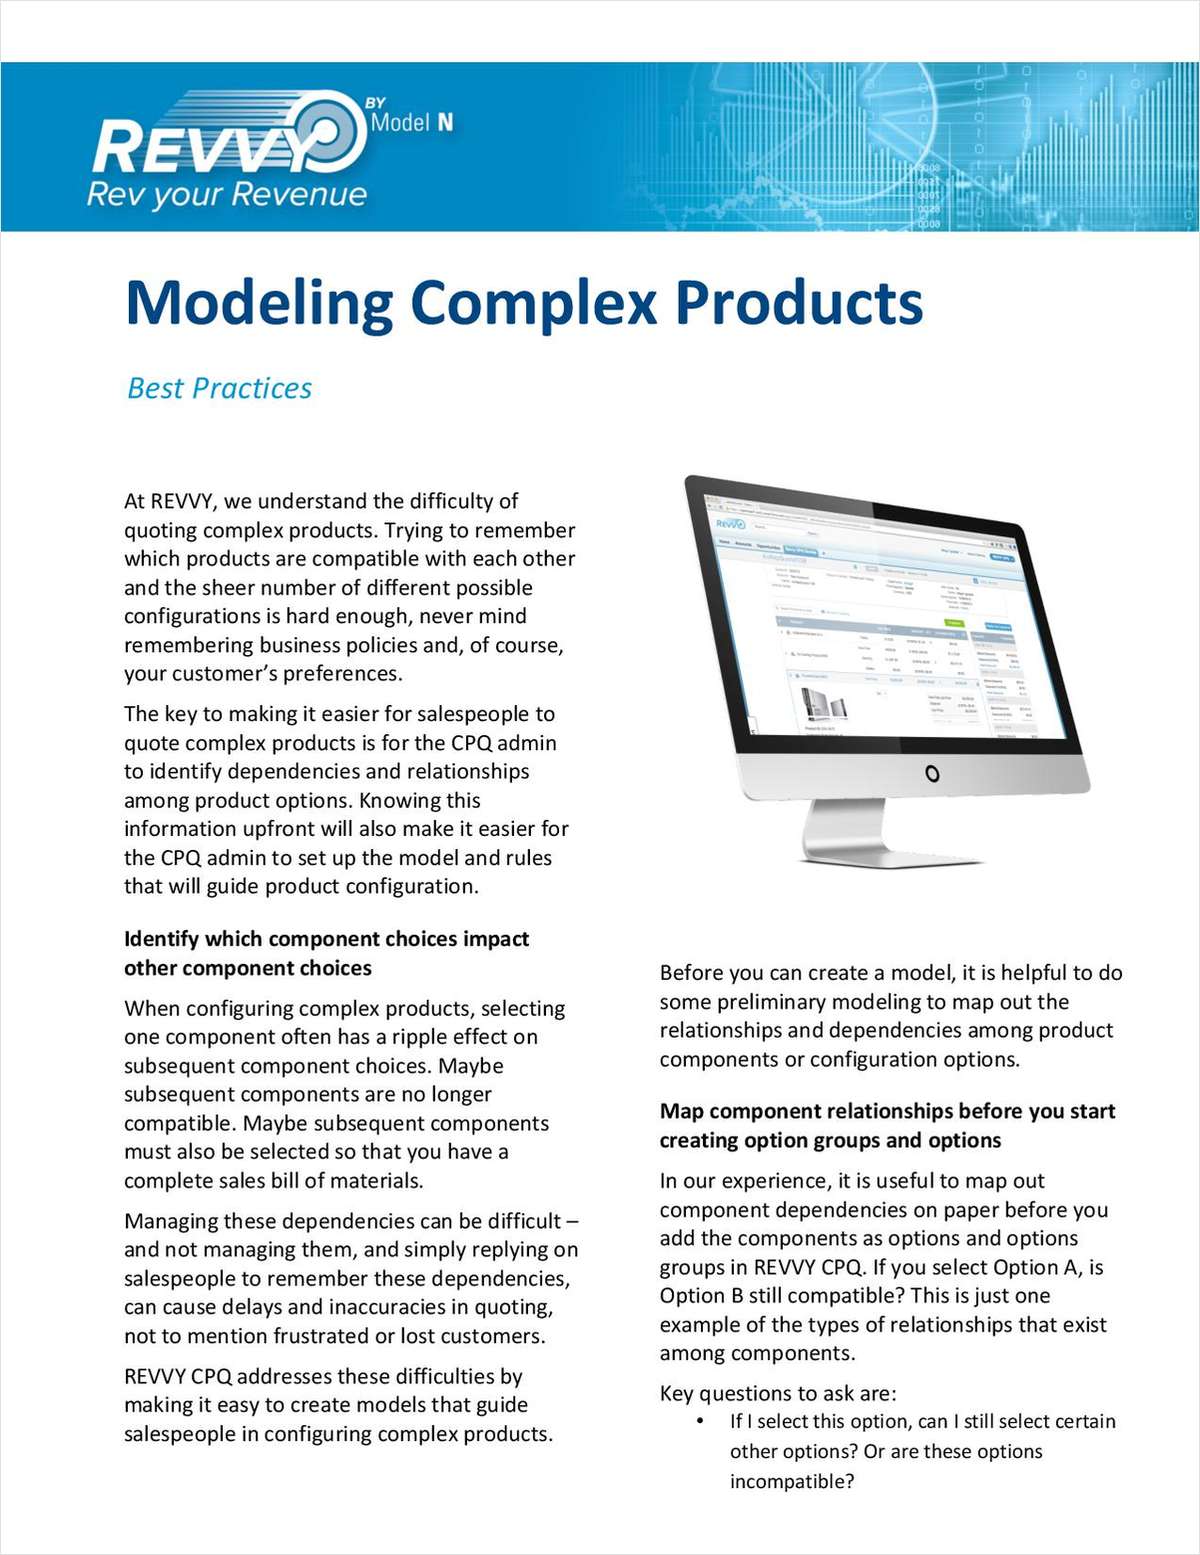 Modeling Complex Products